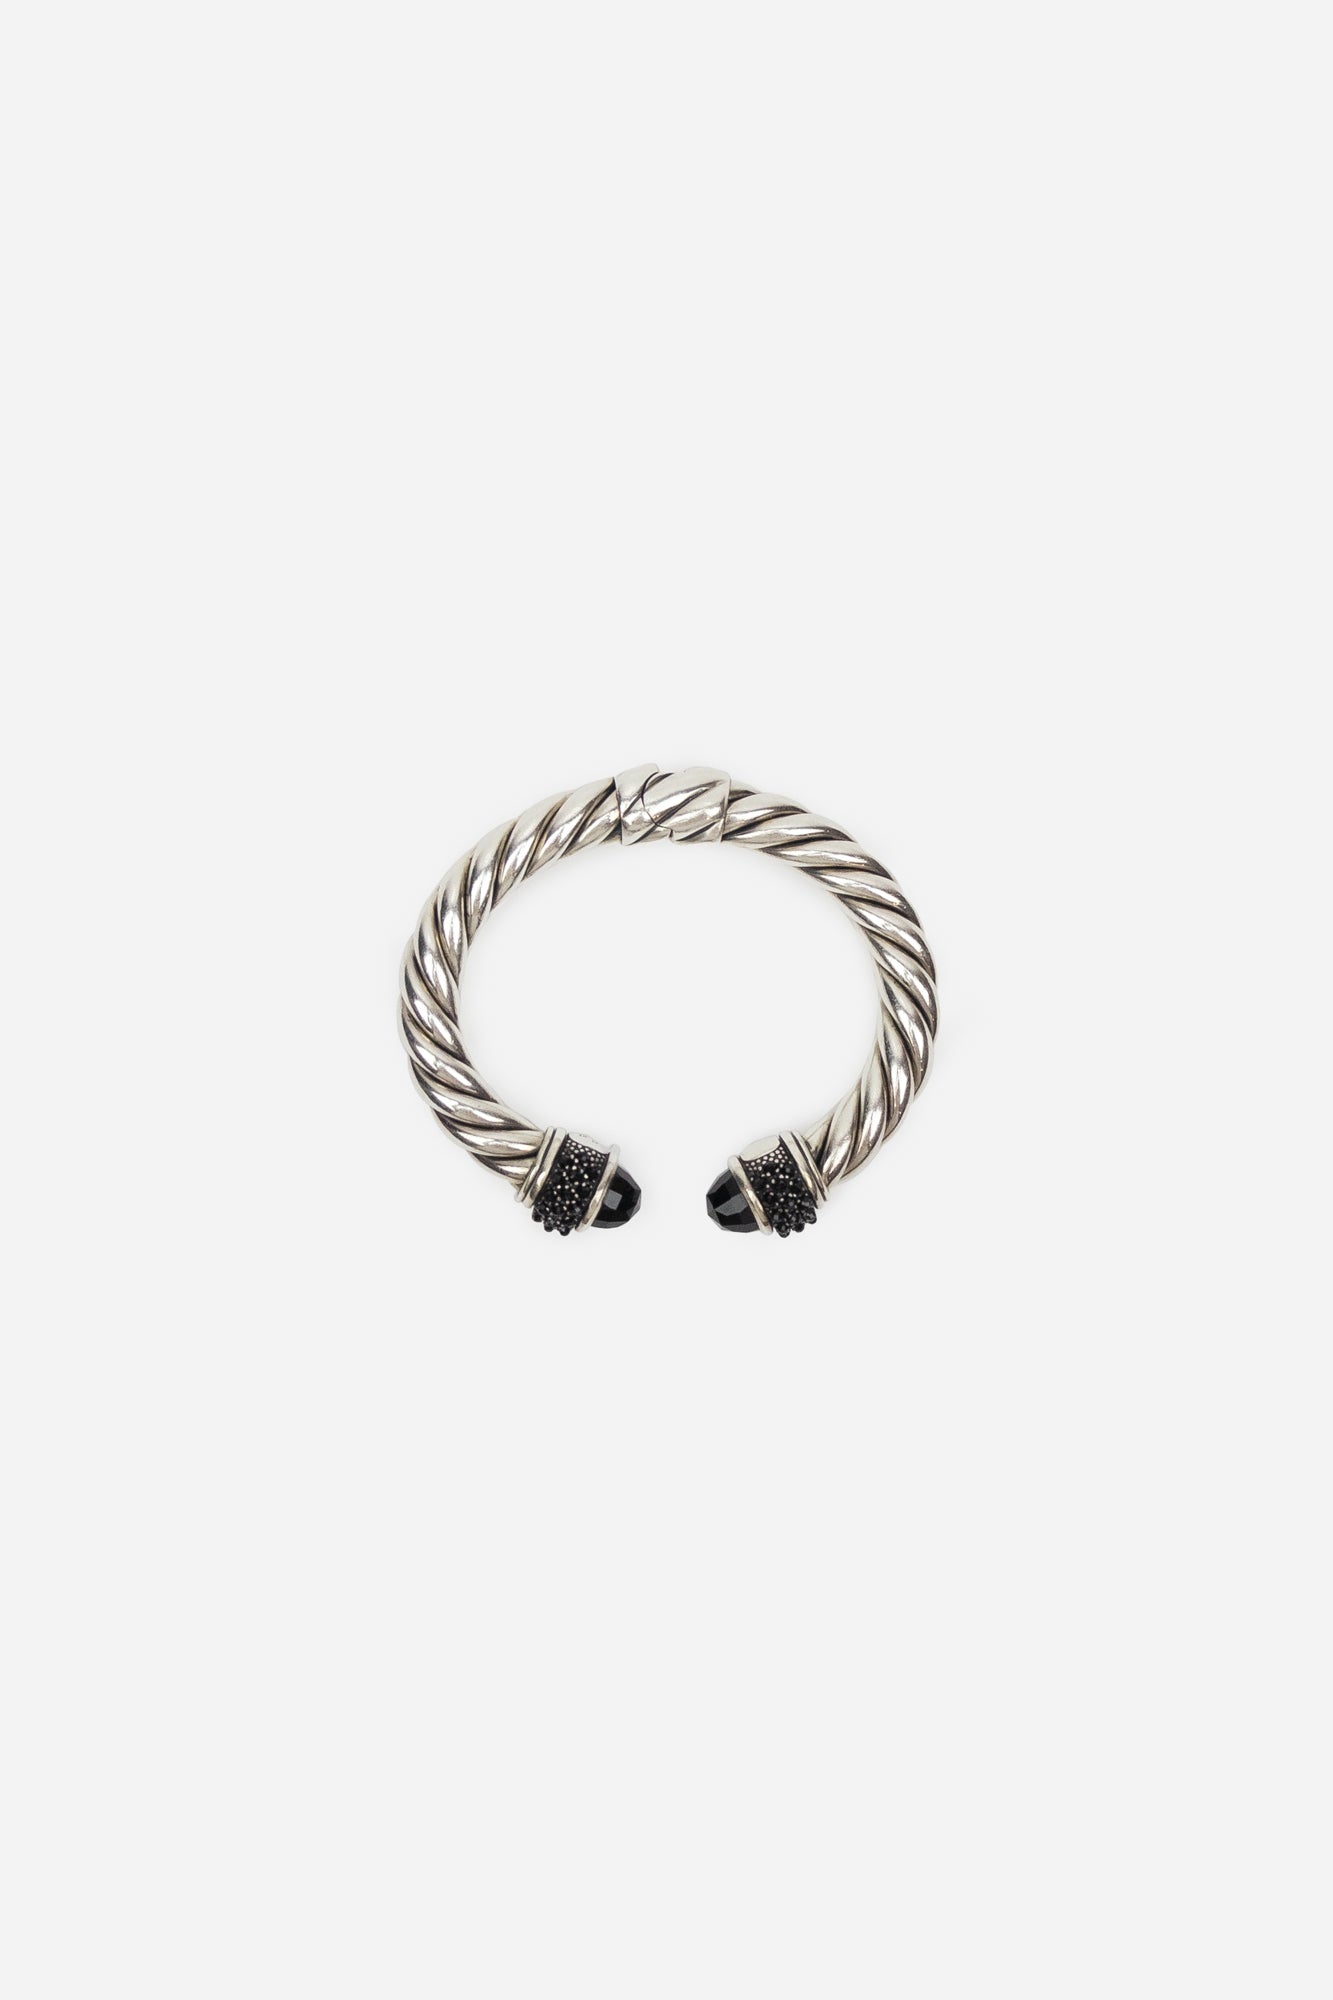 Silver, Onyx and Black Diamonds Cable Cuff Bracelet